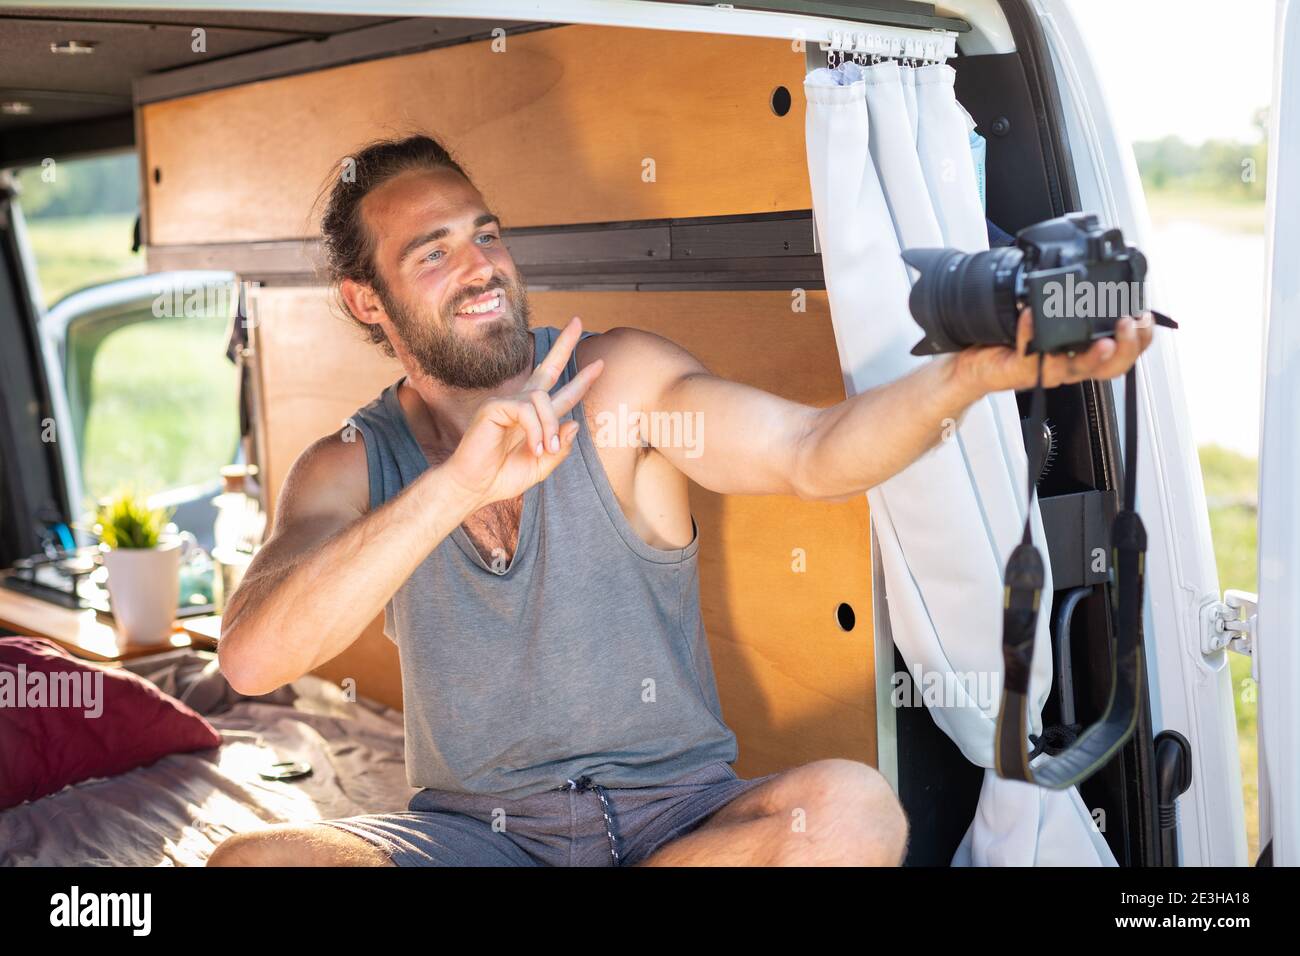 Young man in a camper van pointing a camera at himself Stock Photo